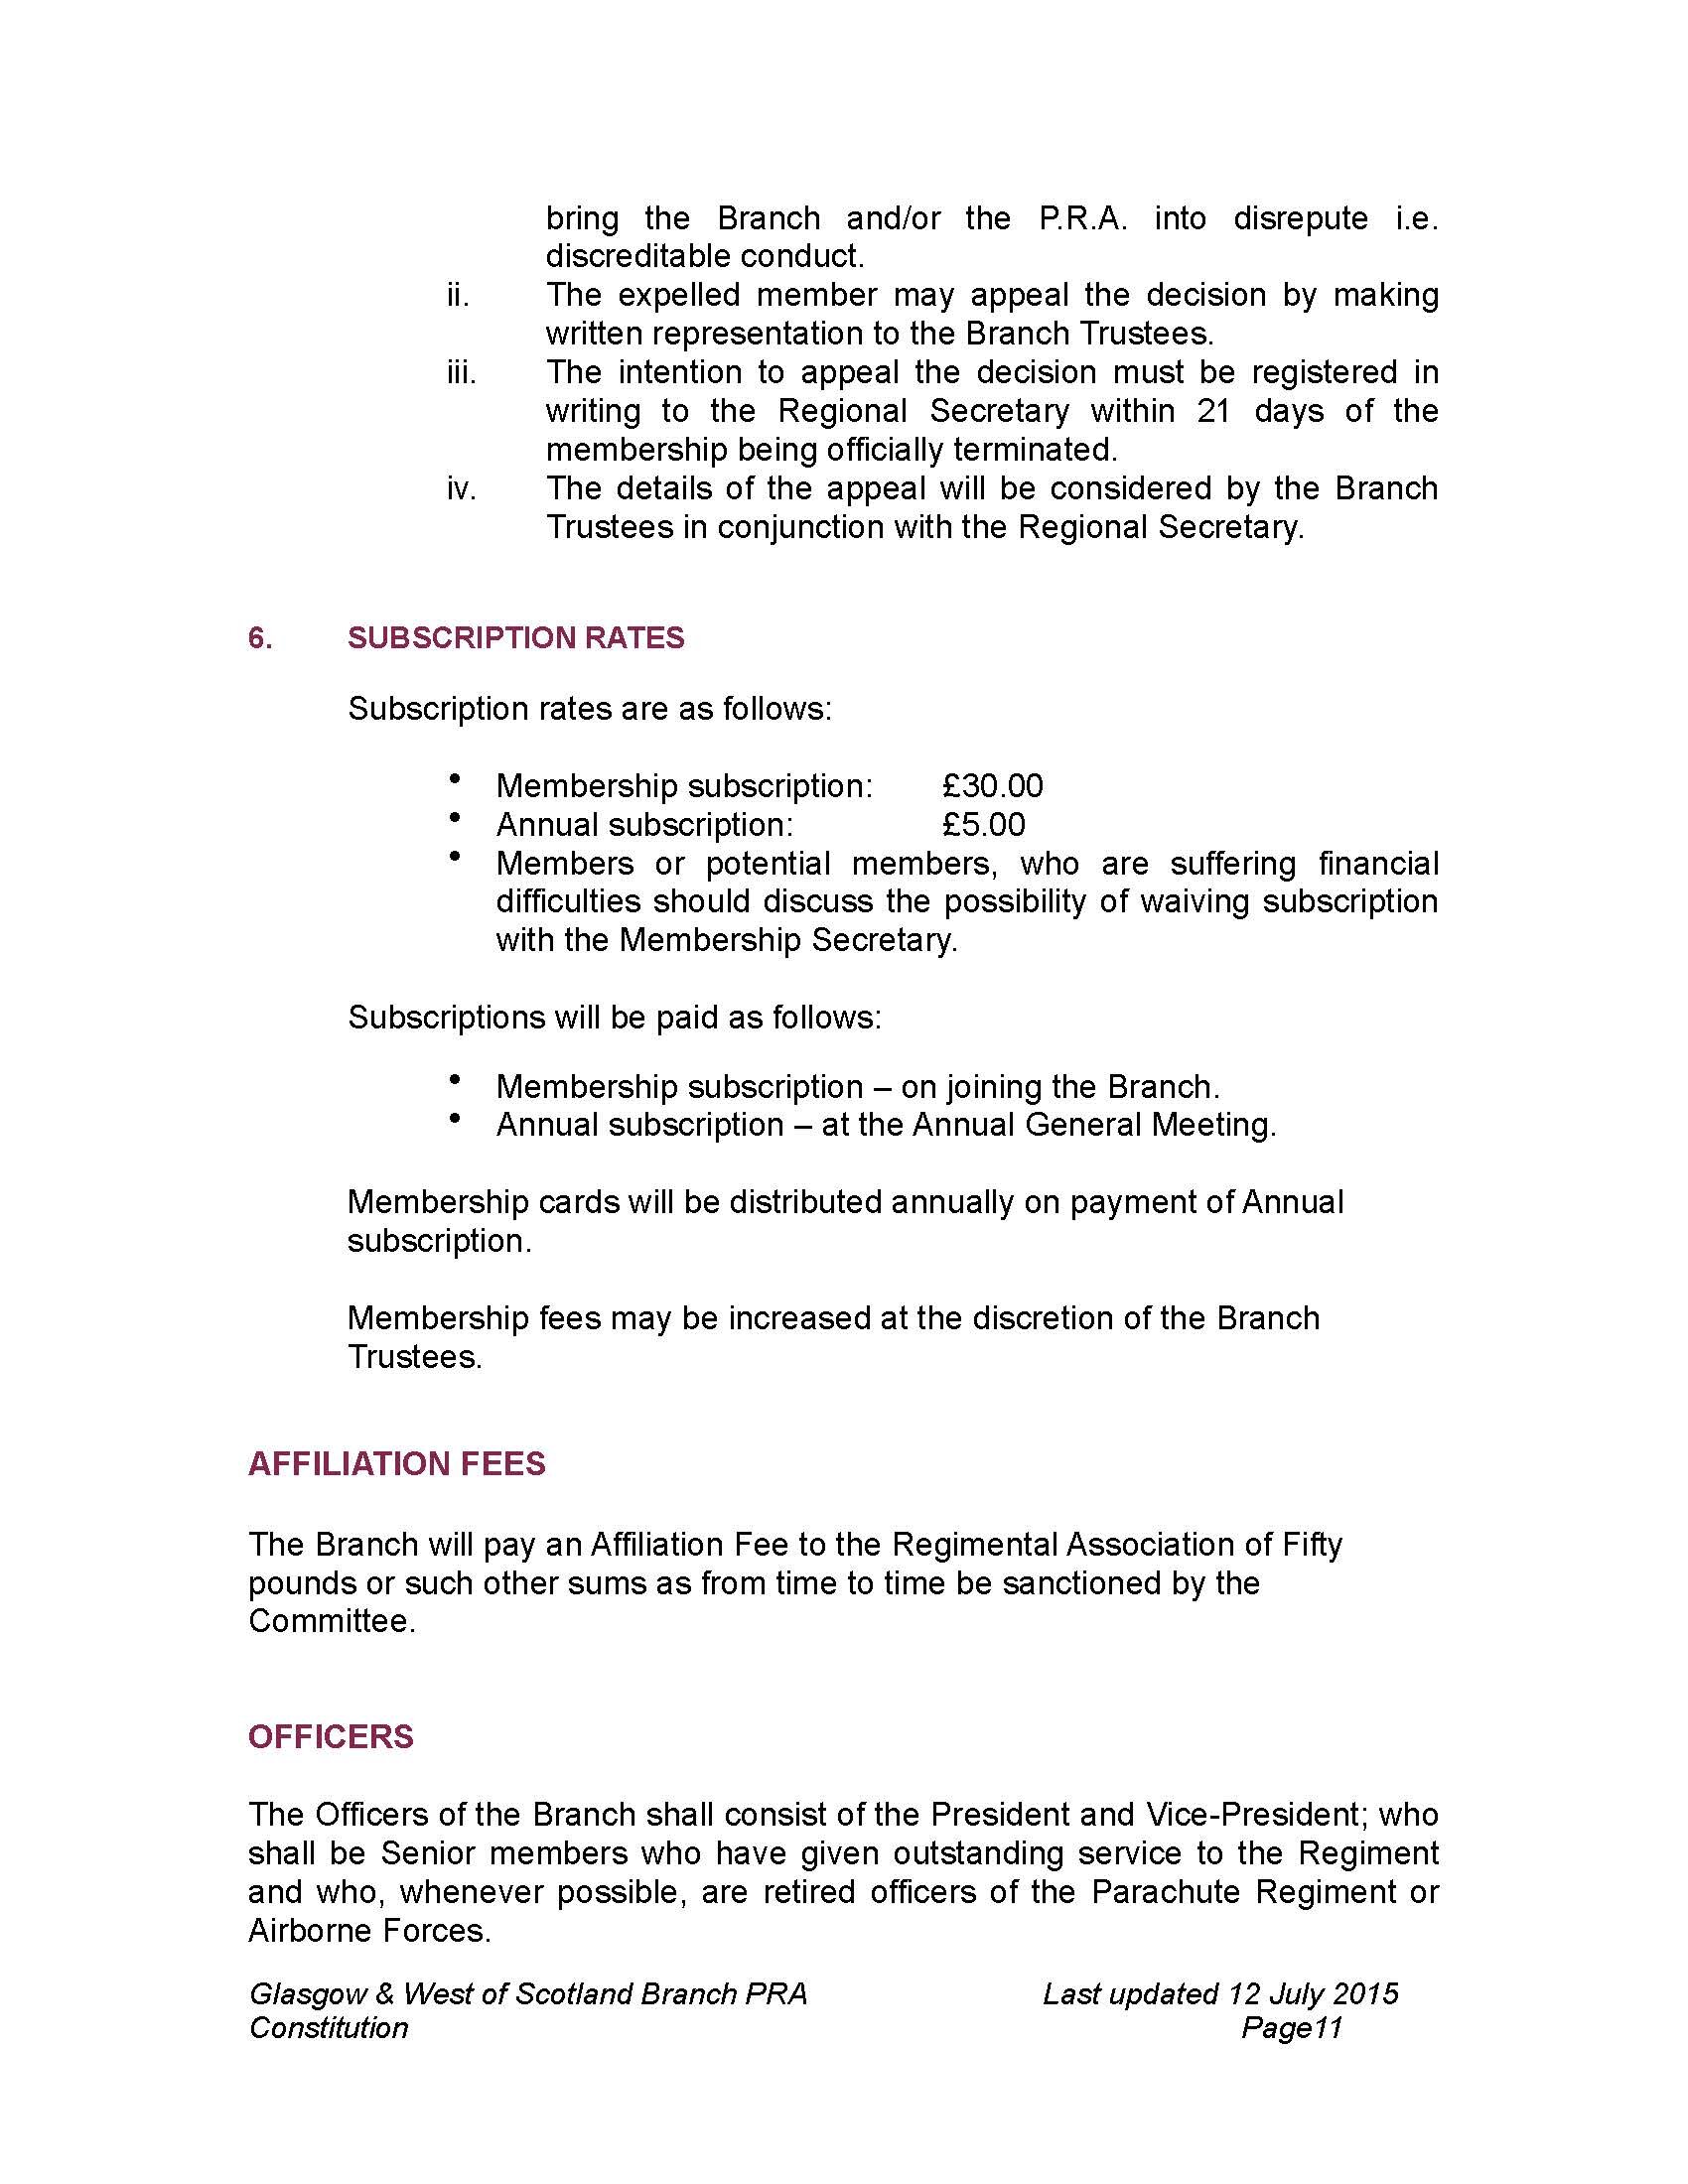 The Constitution of Glasgow & West  of Scotland Branch PRA July  2015_Page_06.jpg